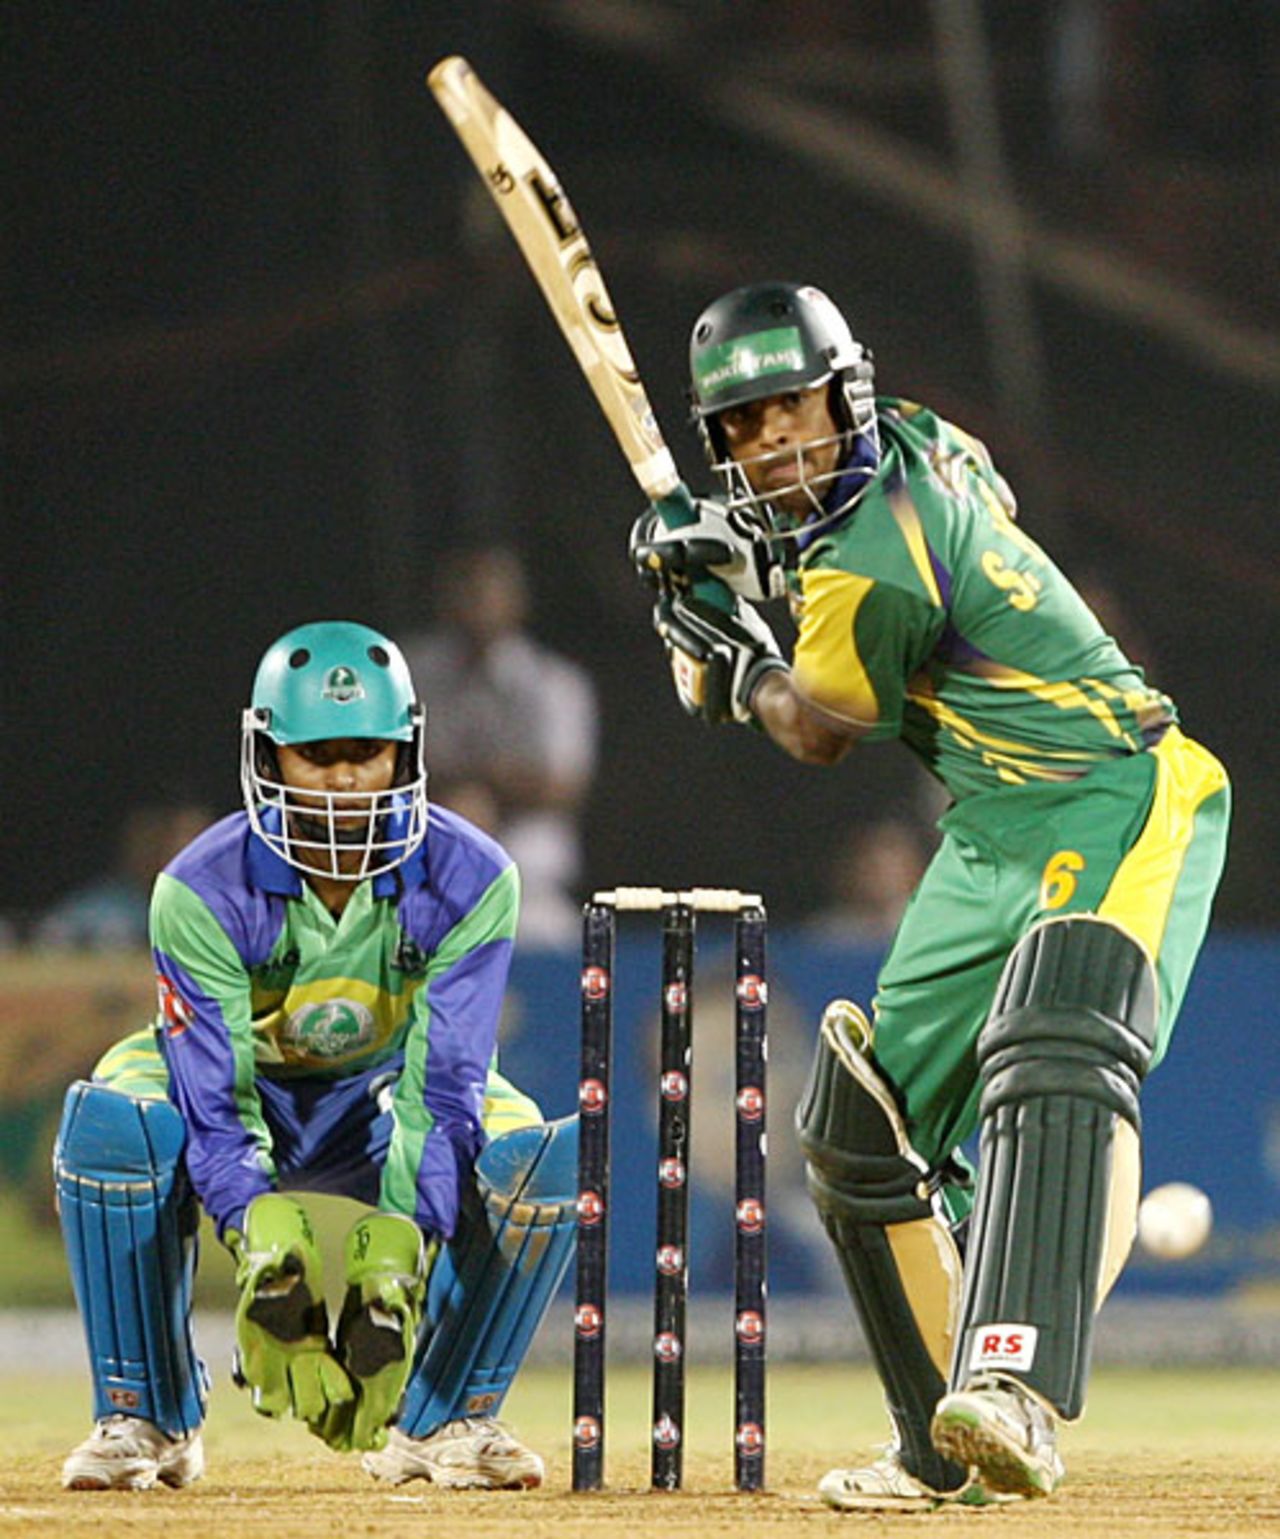 Shahid Yousuf top scored for Lahore with 51, Hyderabad Heroes v Lahore Badshahs, ICL 2nd final, Ahmedabad, November 15, 2008